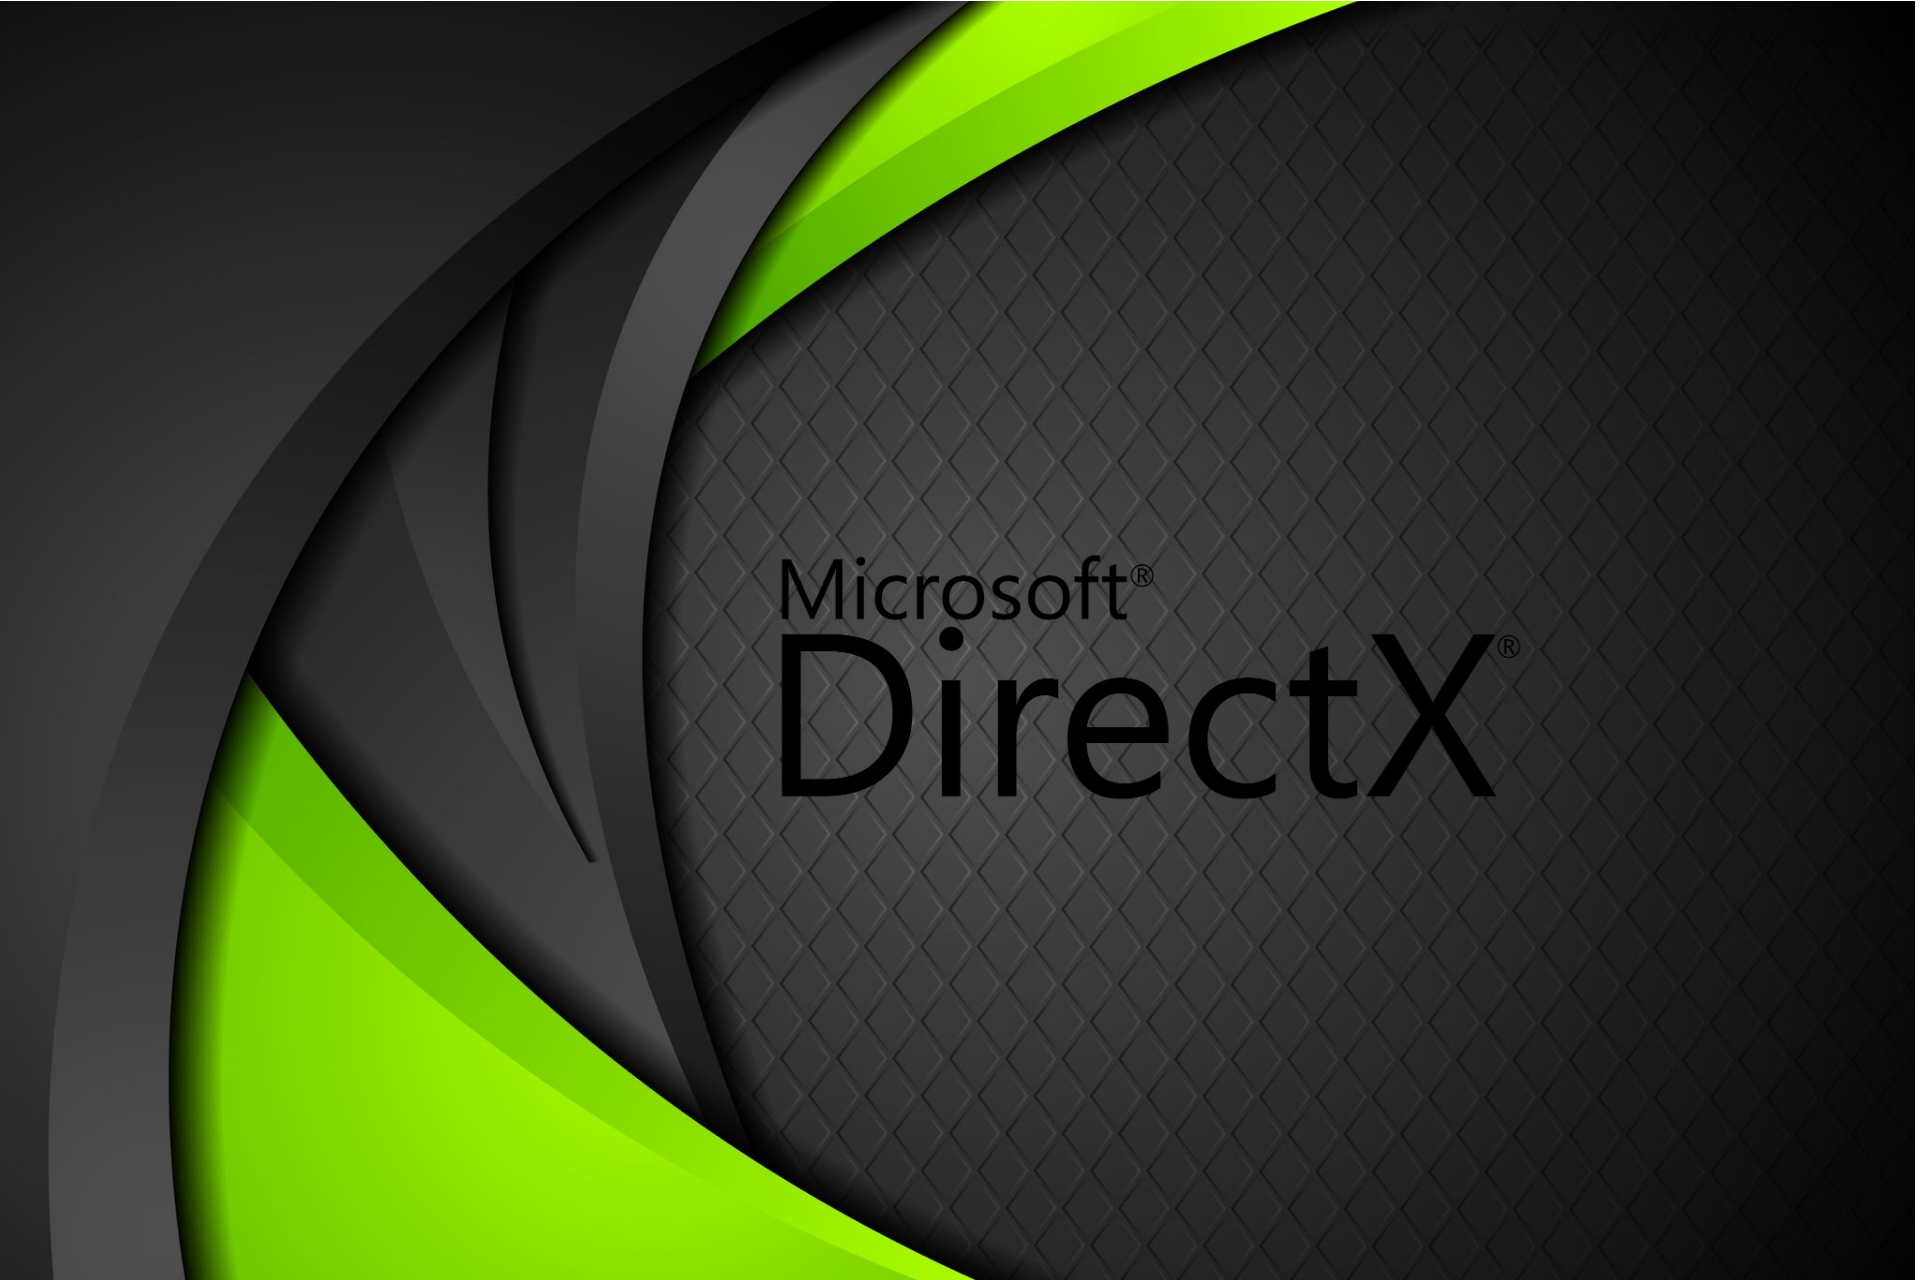 DirectX 12 vs. DirectX 11: which is better for PC gaming